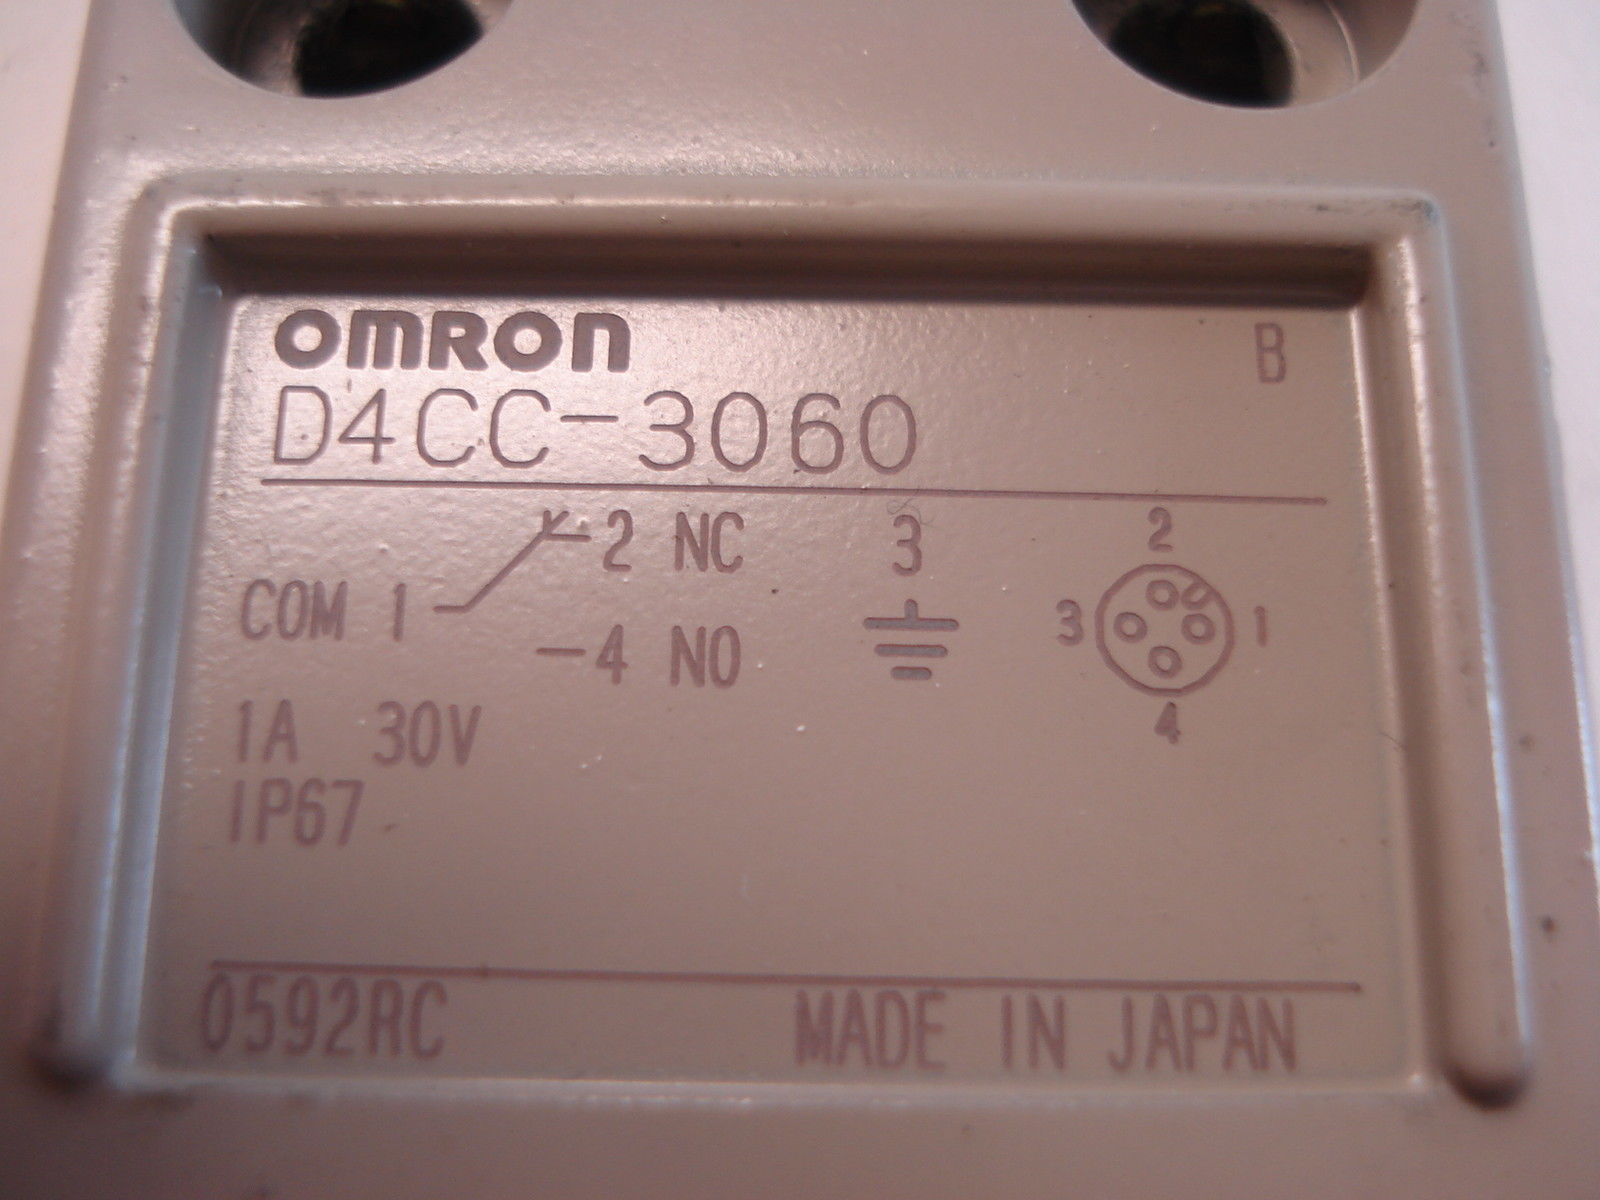 NEW OMRON D4CC-3060 DC ROLLER LEVER D4CC3060 